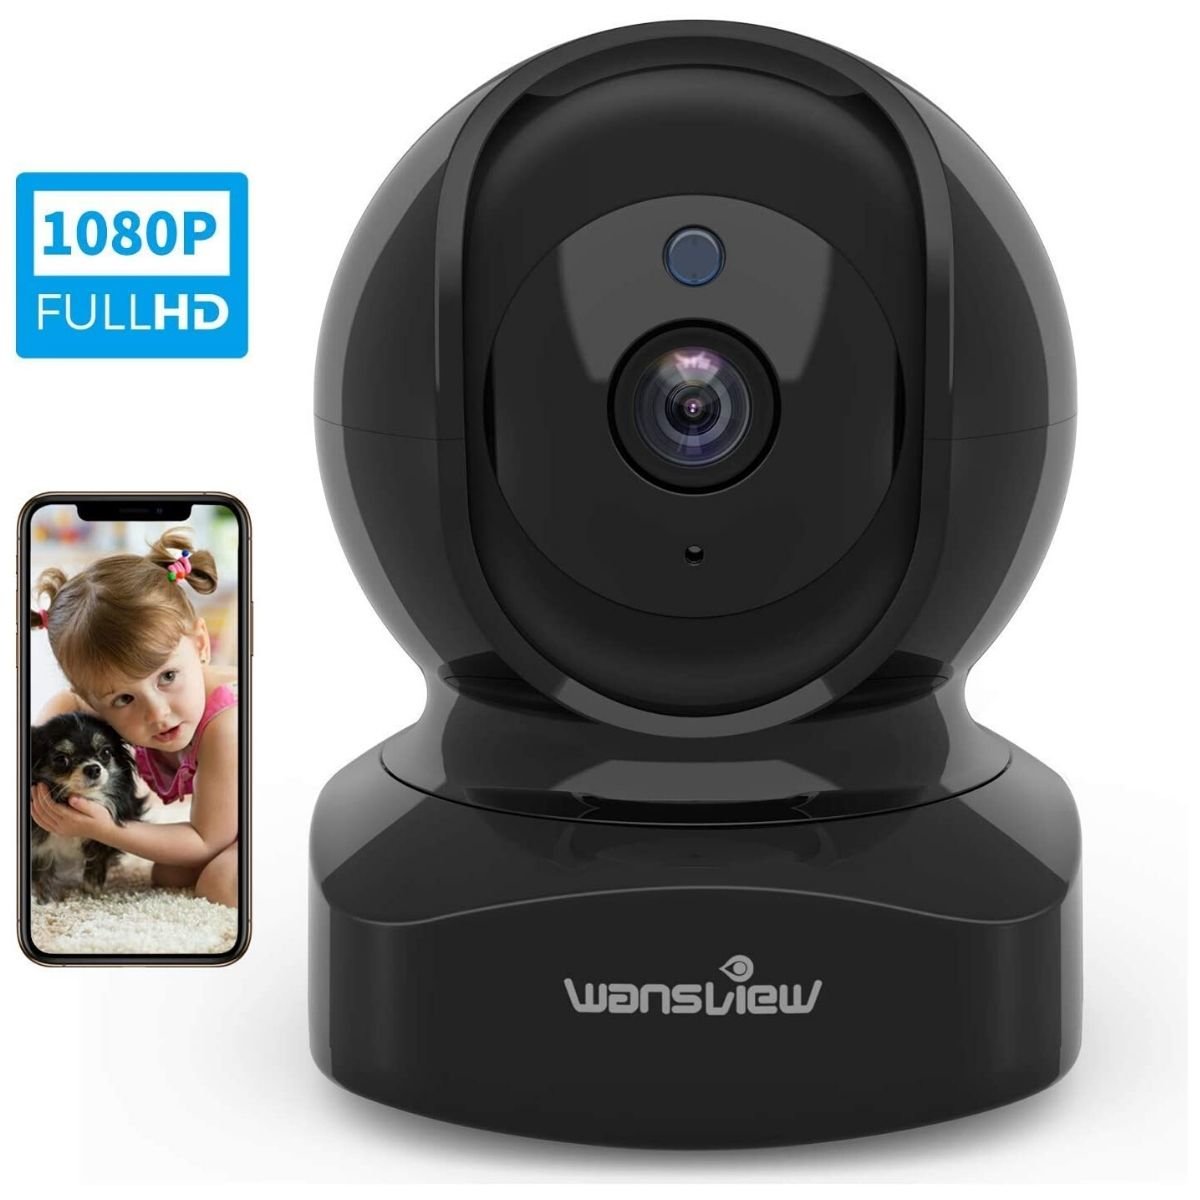 The Best Indoor Home Security Camera Option: Wansview Wireless Security Camera